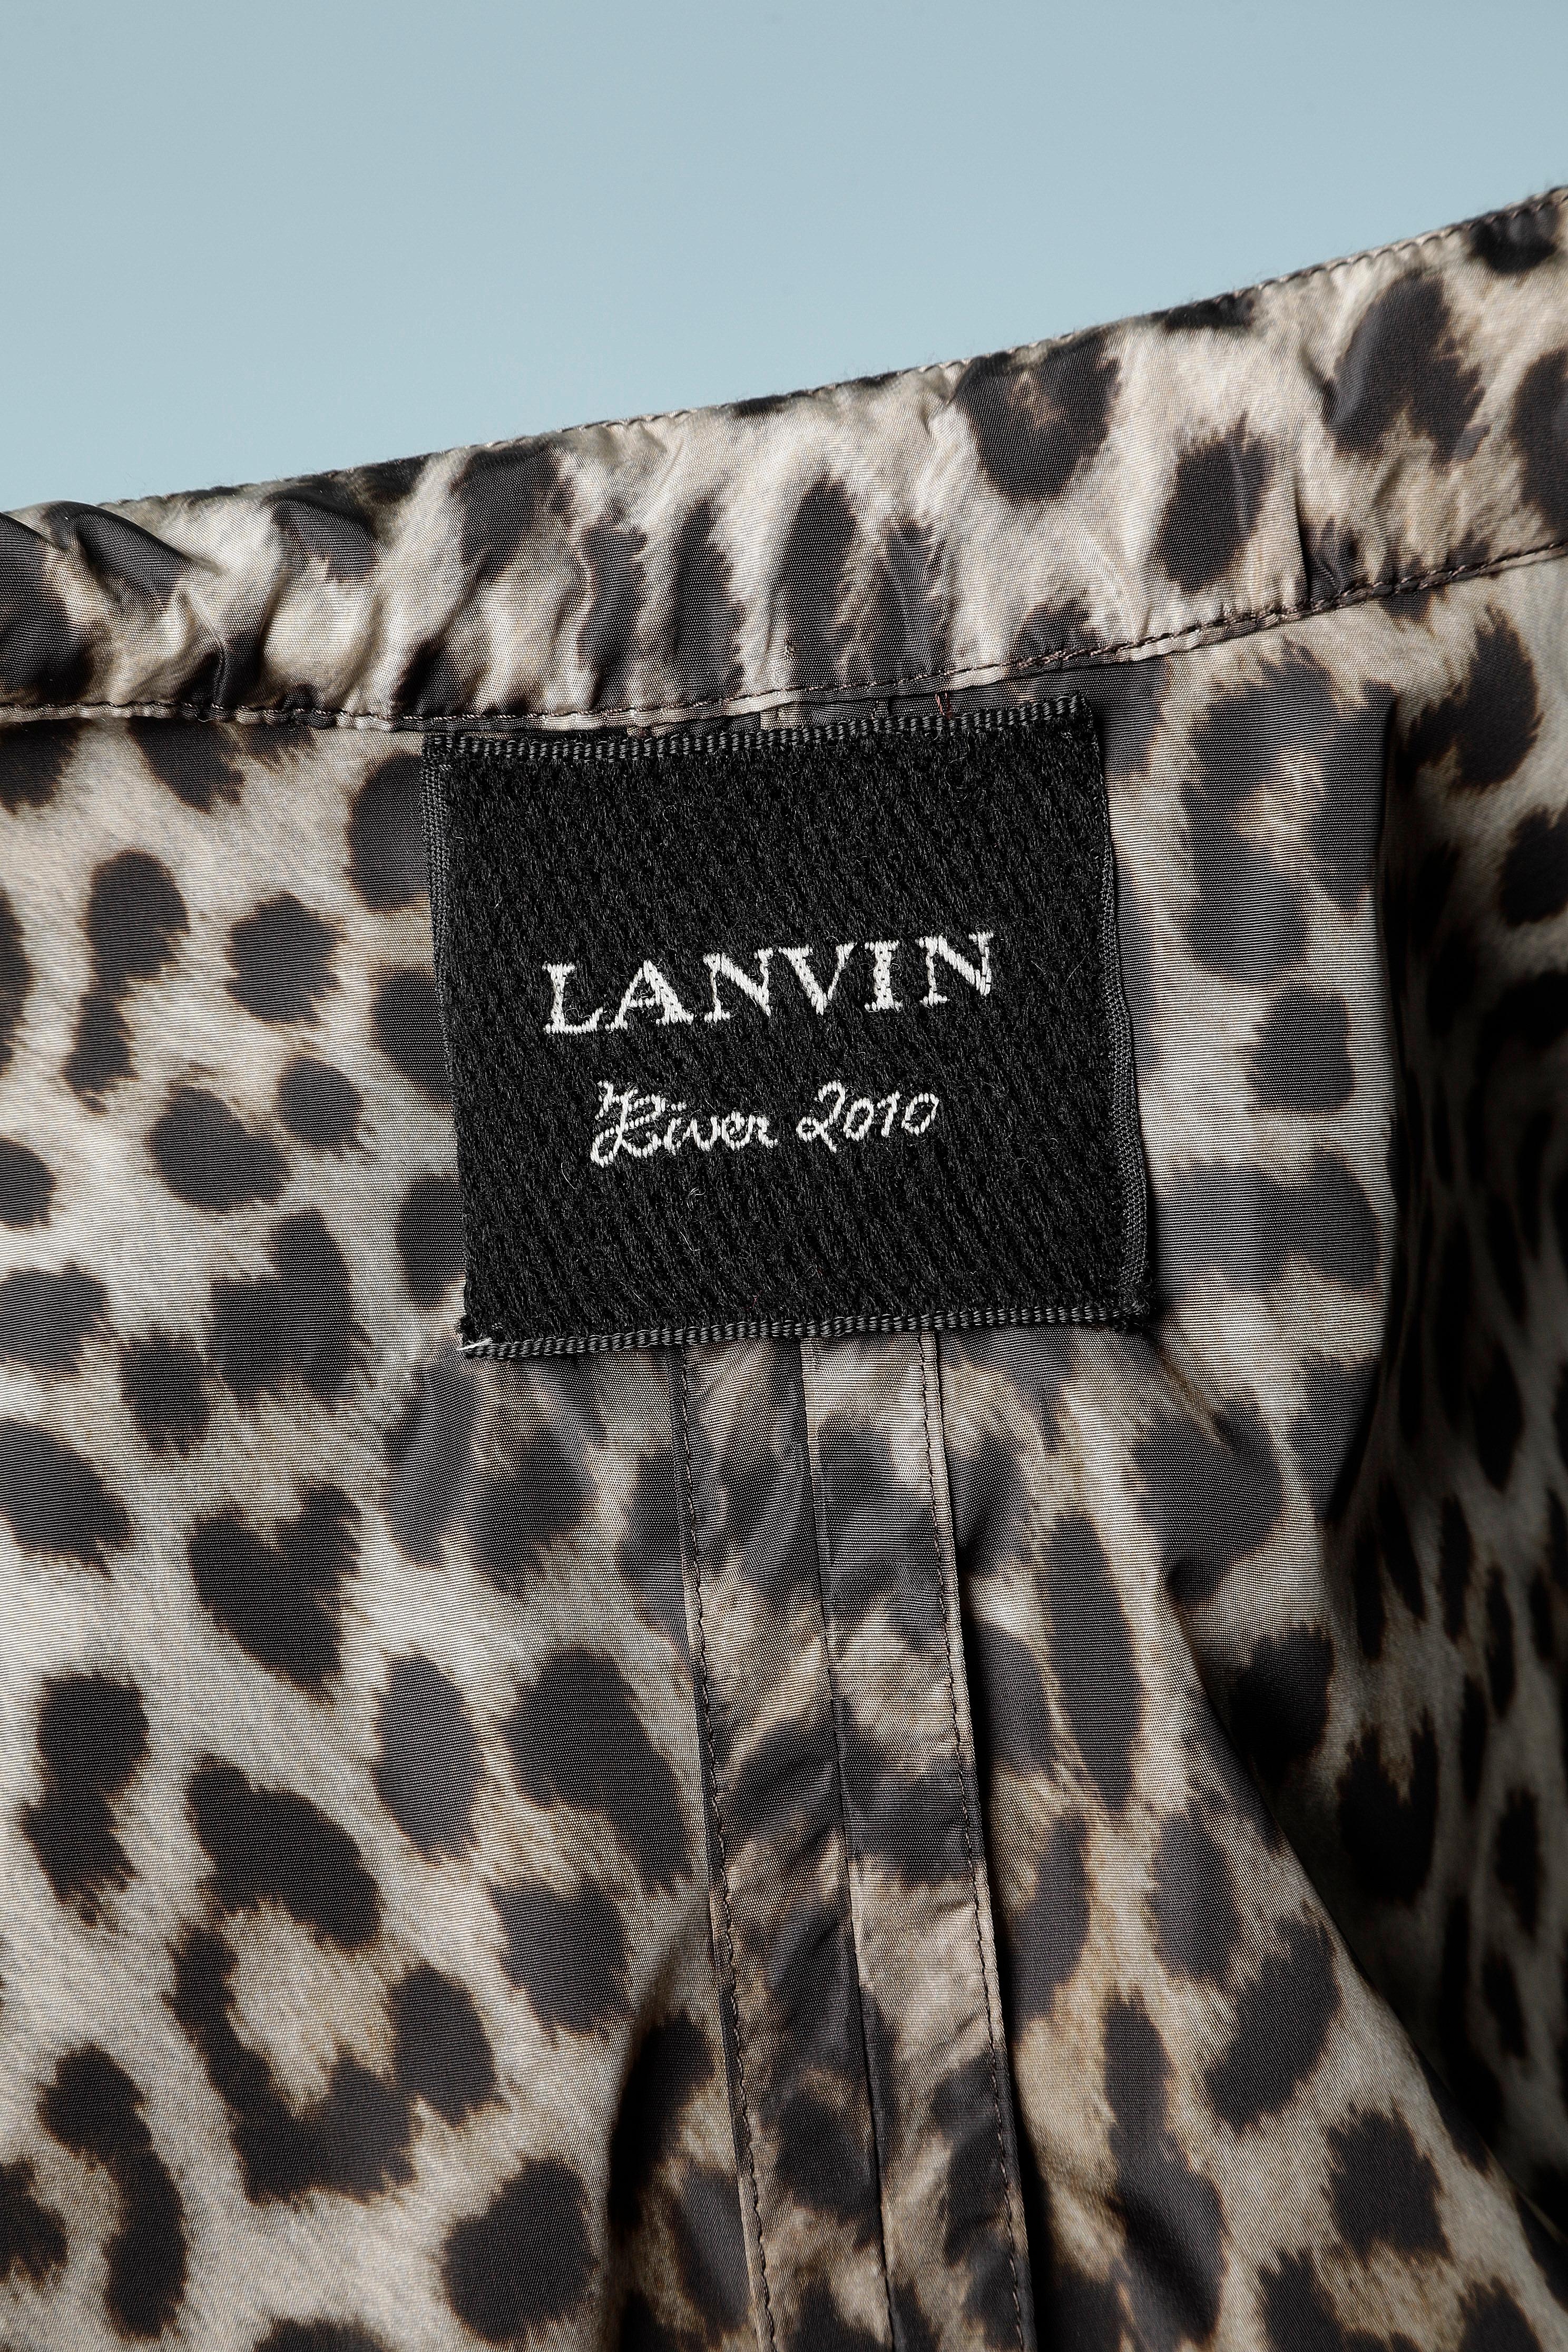 Nylon leopard printed double-breasted trench-coat Lanvin by Alber Elbaz 2010 For Sale 3